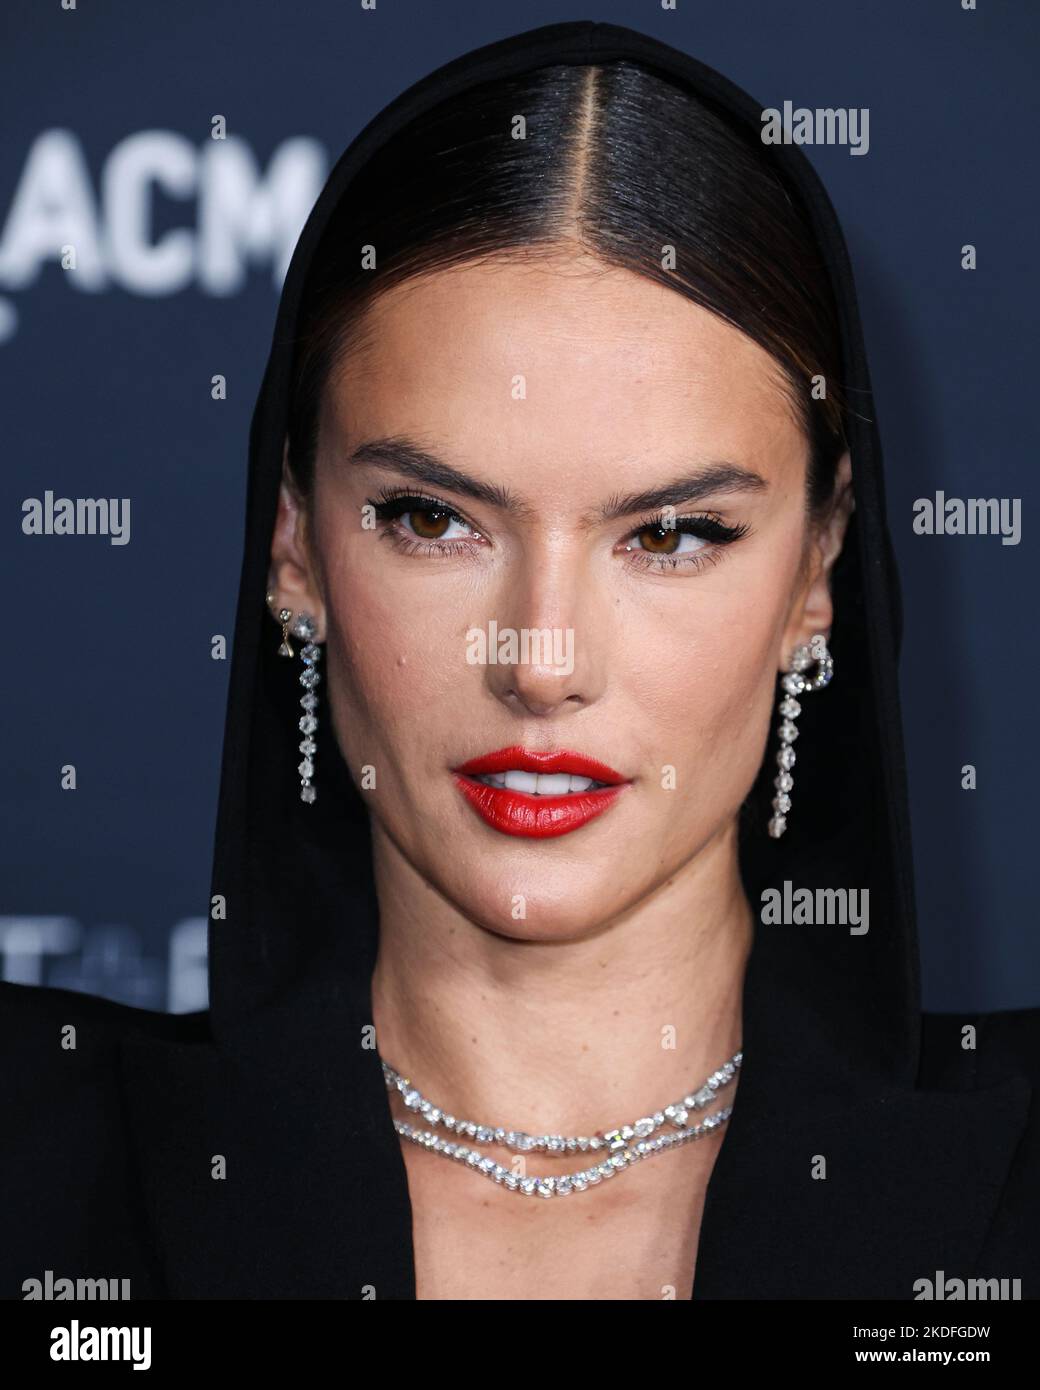 LOS ANGELES, CALIFORNIA, USA - NOVEMBER 05: Alessandra Ambrosio arrives at the 11th Annual LACMA Art + Film Gala 2022 presented by Gucci held at the Los Angeles County Museum of Art on November 5, 2022 in Los Angeles, California, United States. (Photo by Xavier Collin/Image Press Agency) Stock Photo